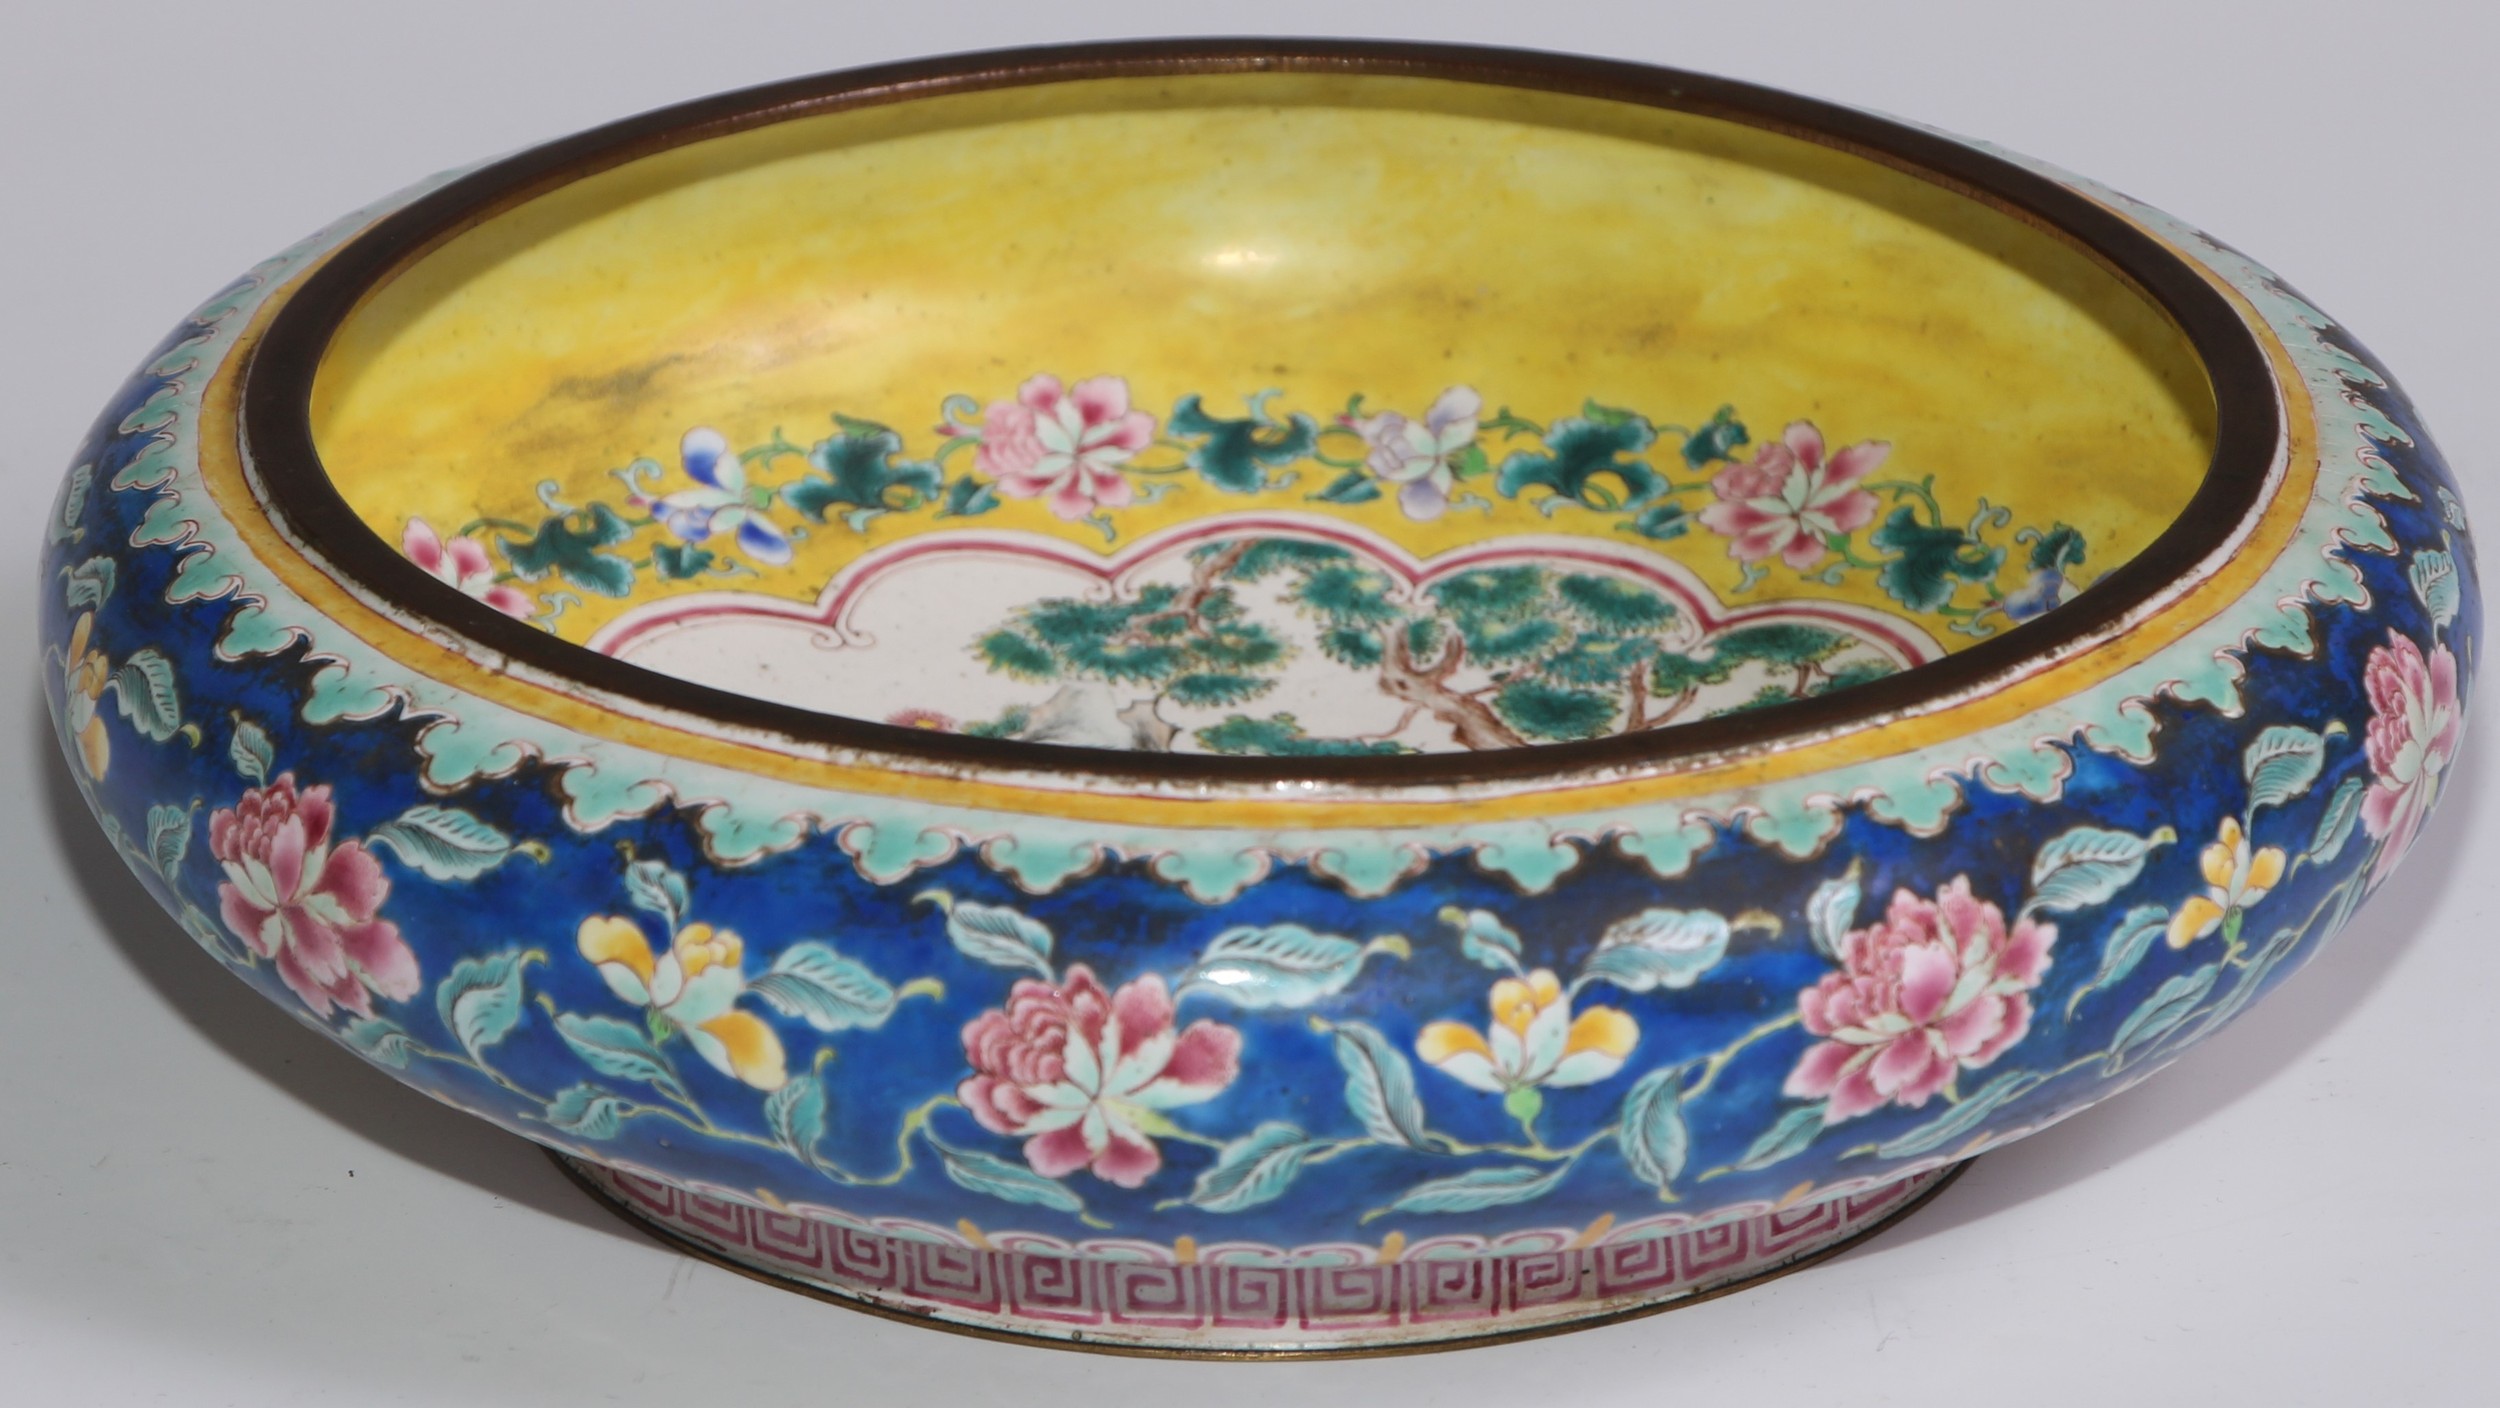 A Chinese famille rose enamel bowed circular bowl, painted in the typical Cantonese manner with